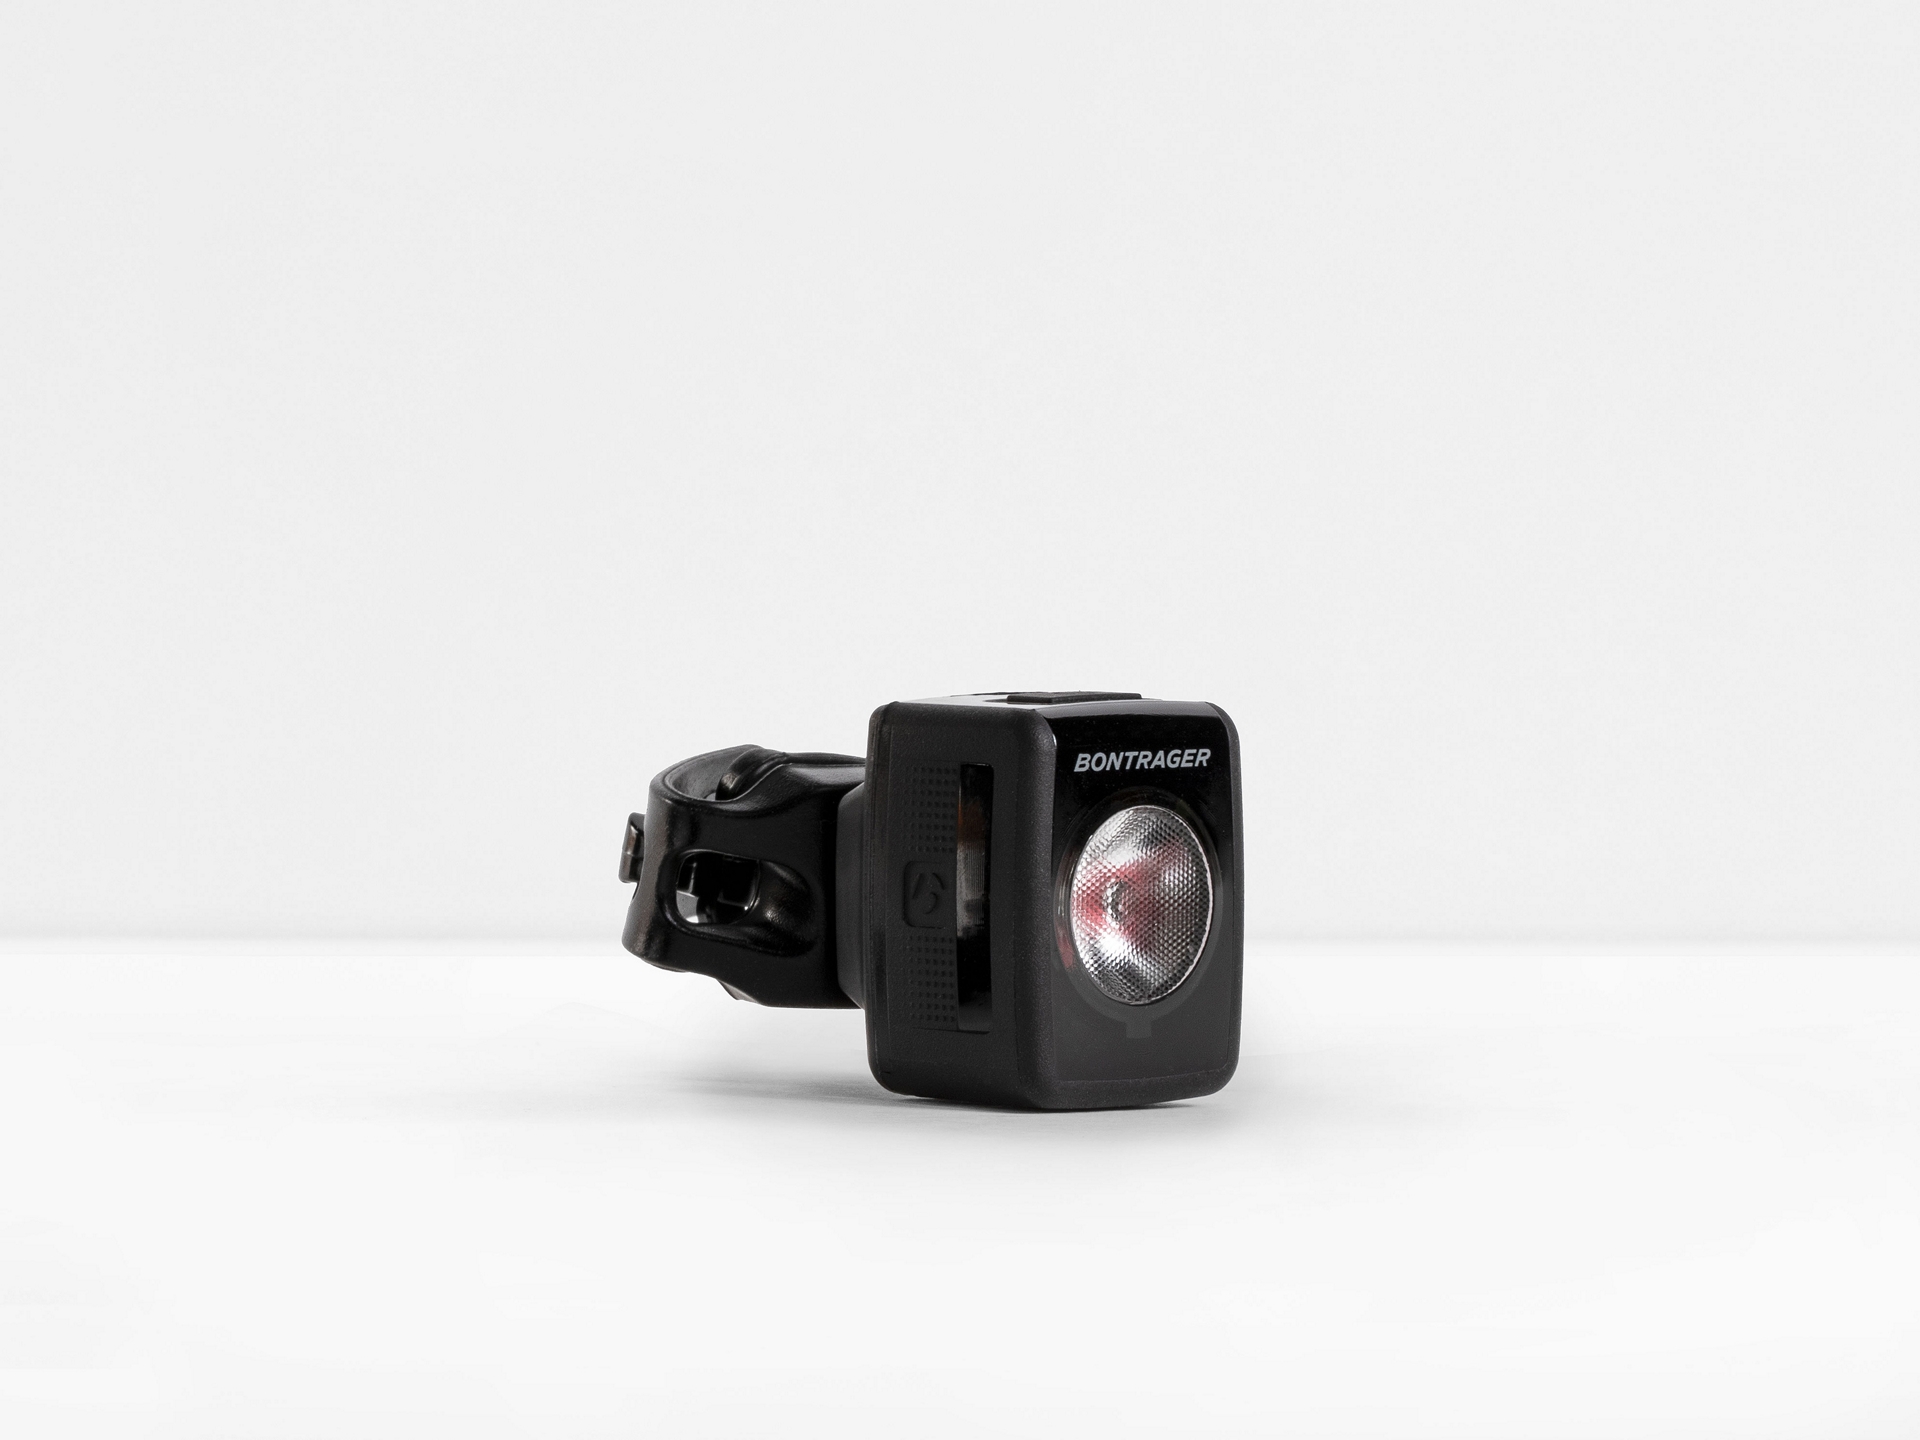 Photo - Eclairage ar Bontrager Flare rt usb rechargeable